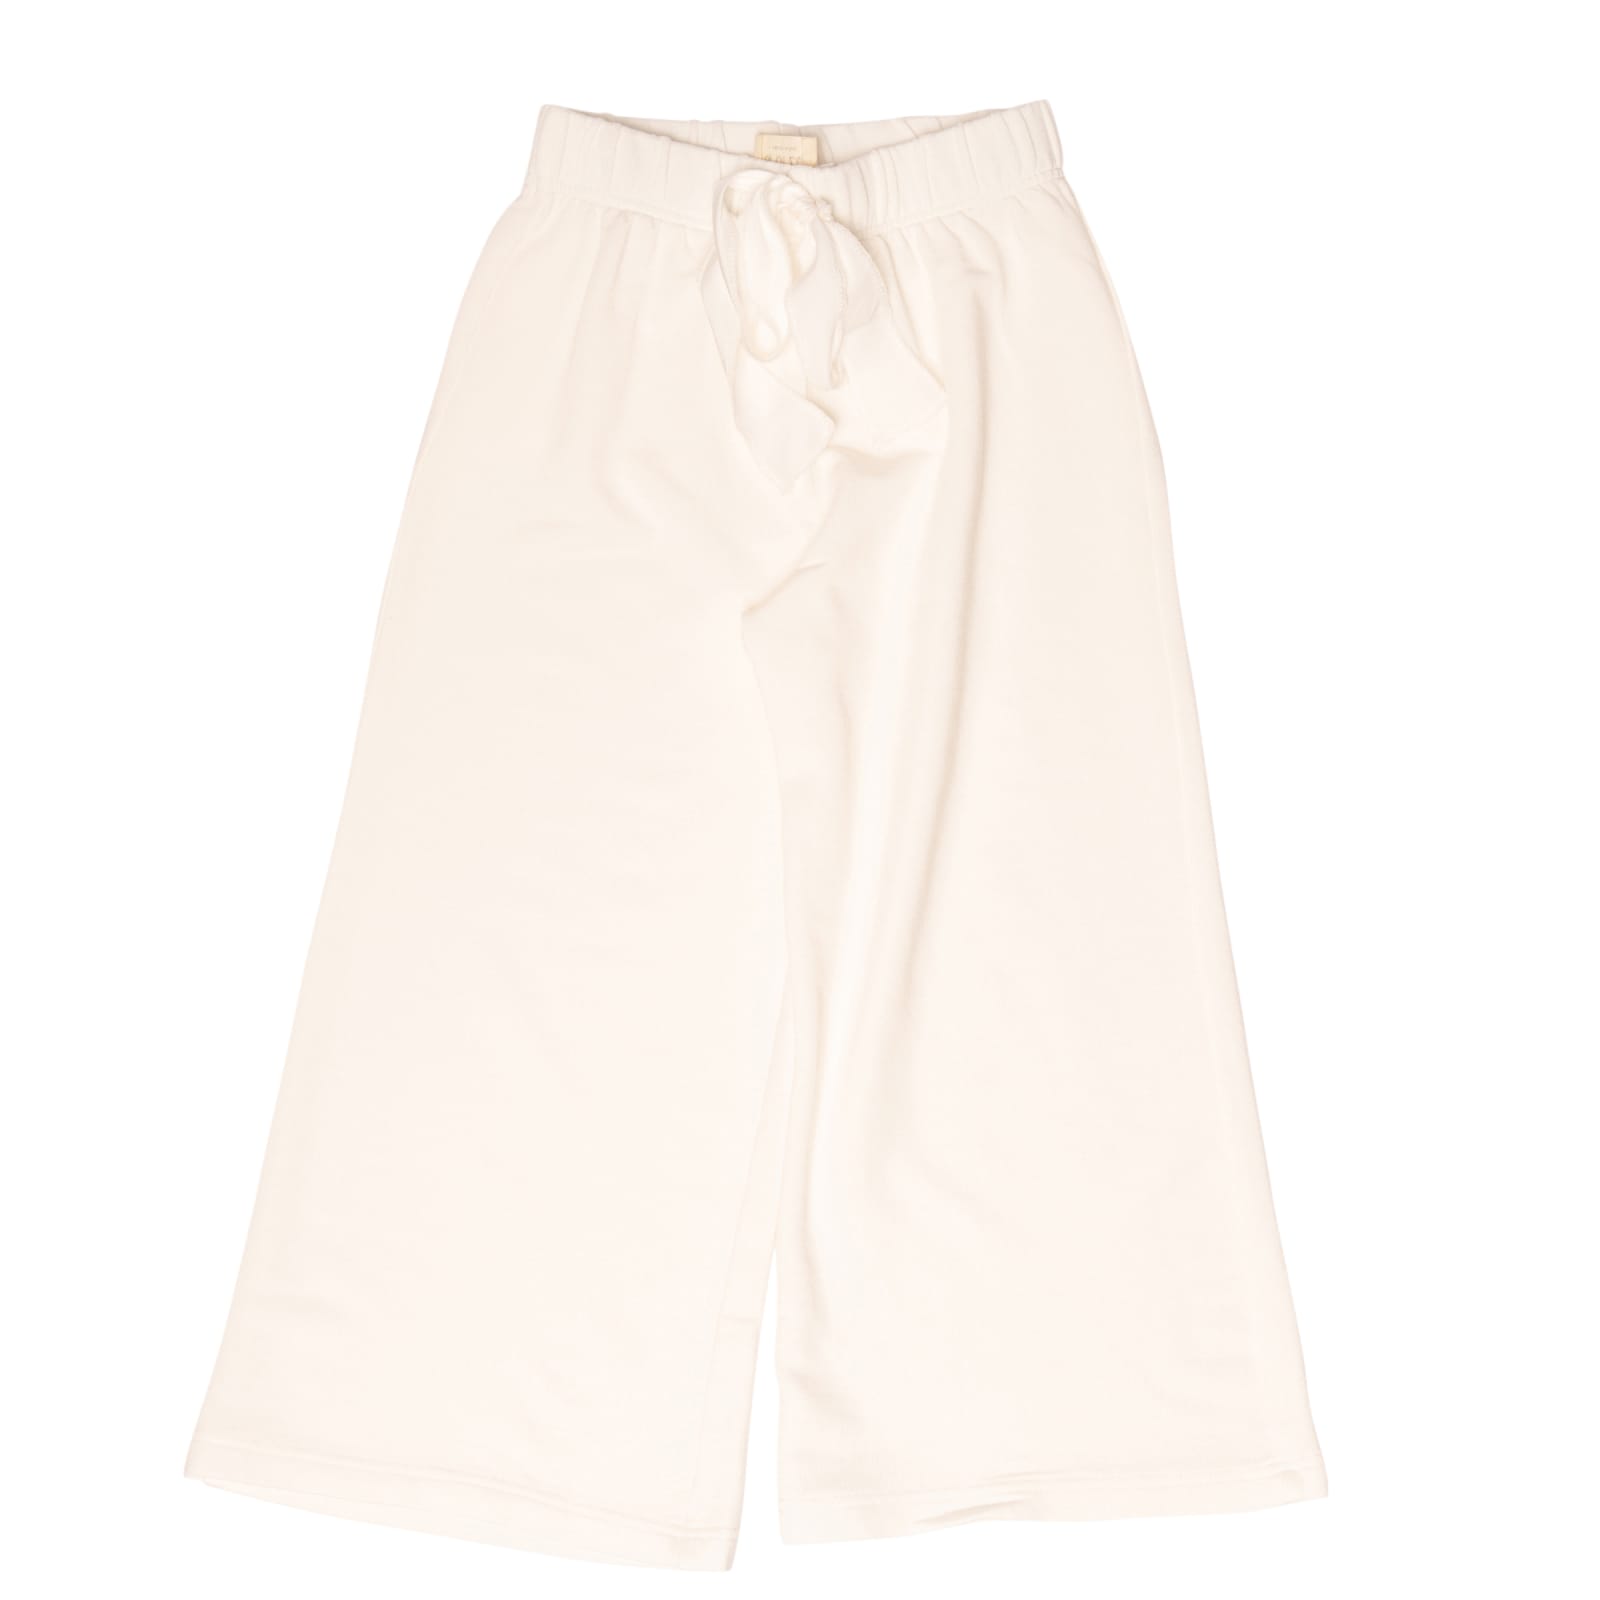 Caffe' D'orzo Kids' Pants In Bianco